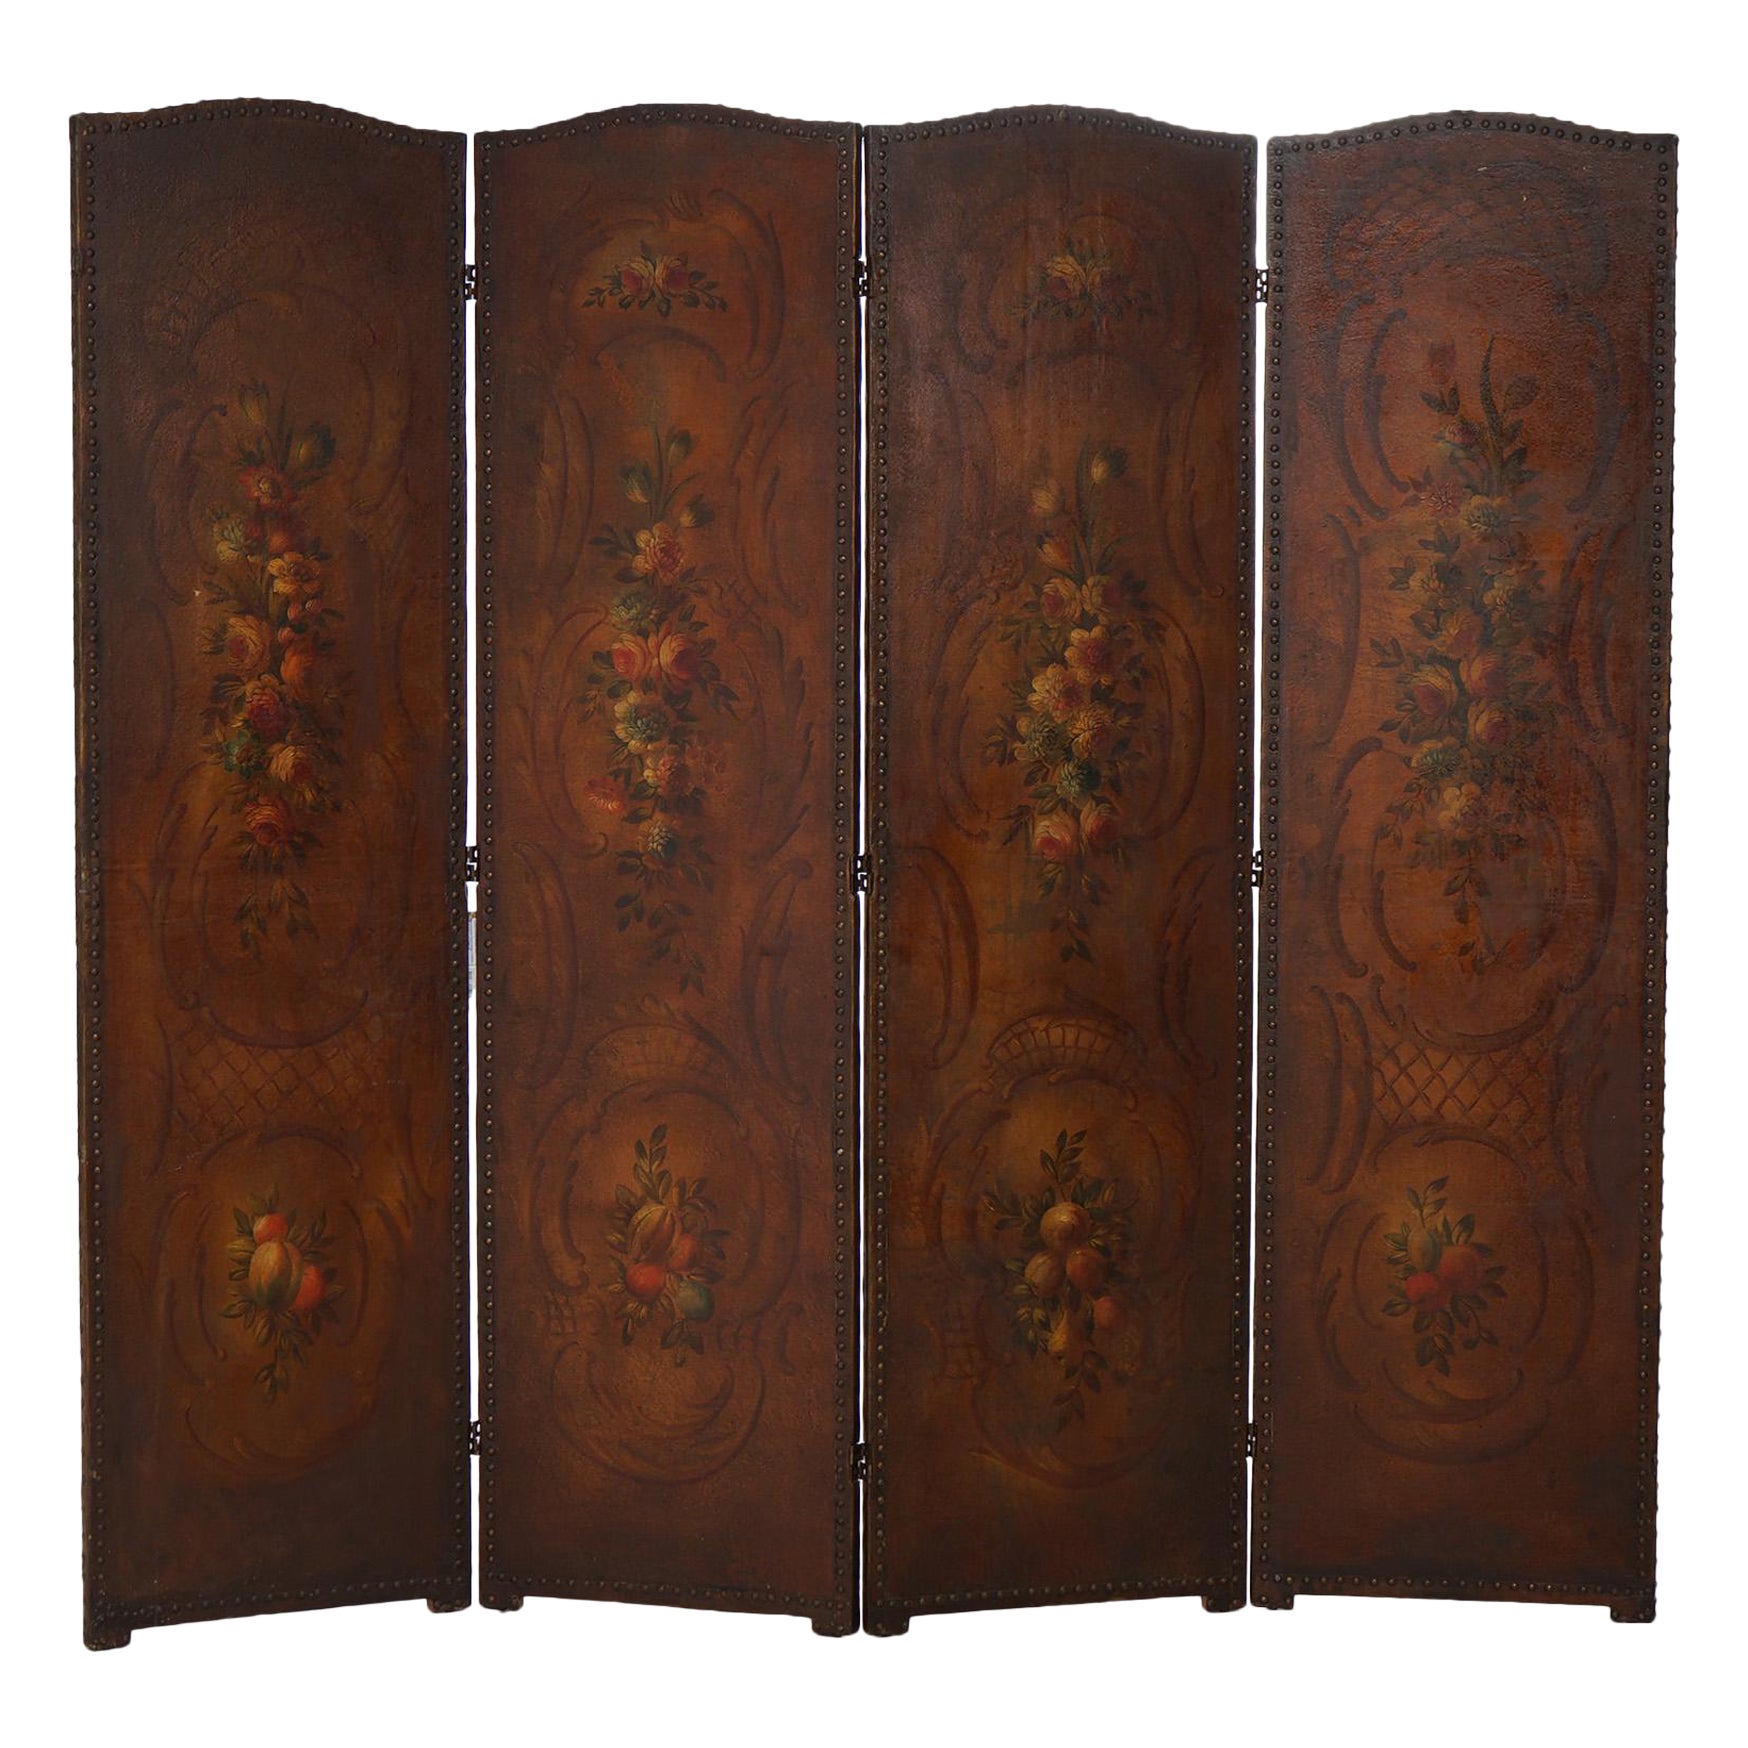 Antique Arts & Crafts Leather Folding Screen with Polychromed Floral Design